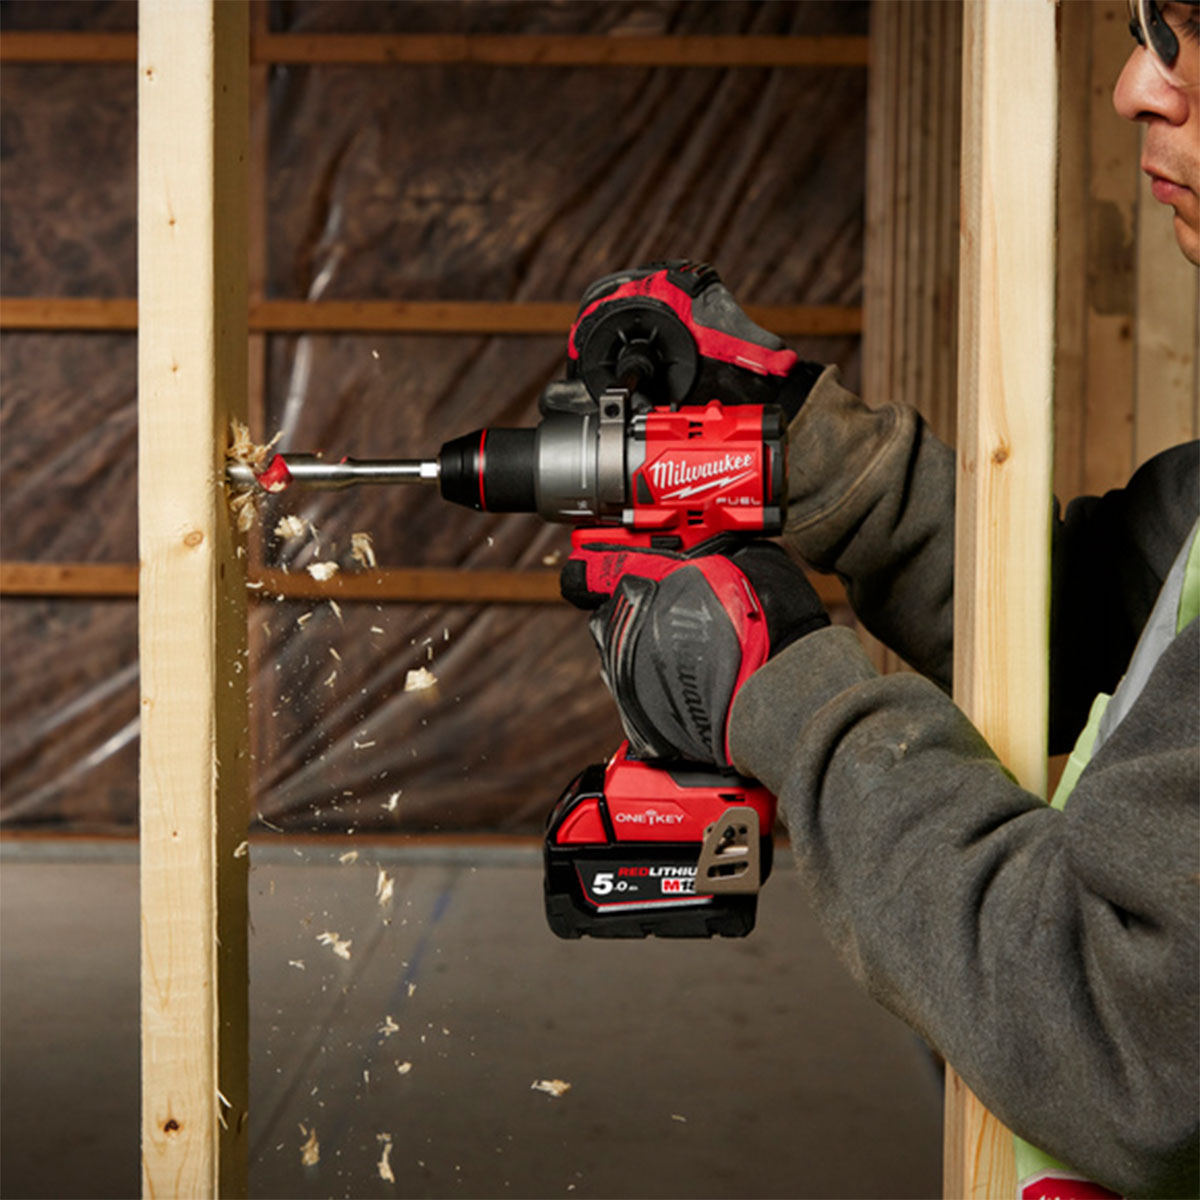 Milwaukee M18ONEPD3-0X 18V FUEL ONE-KEY Brushless Combi Drill Body Only with Case